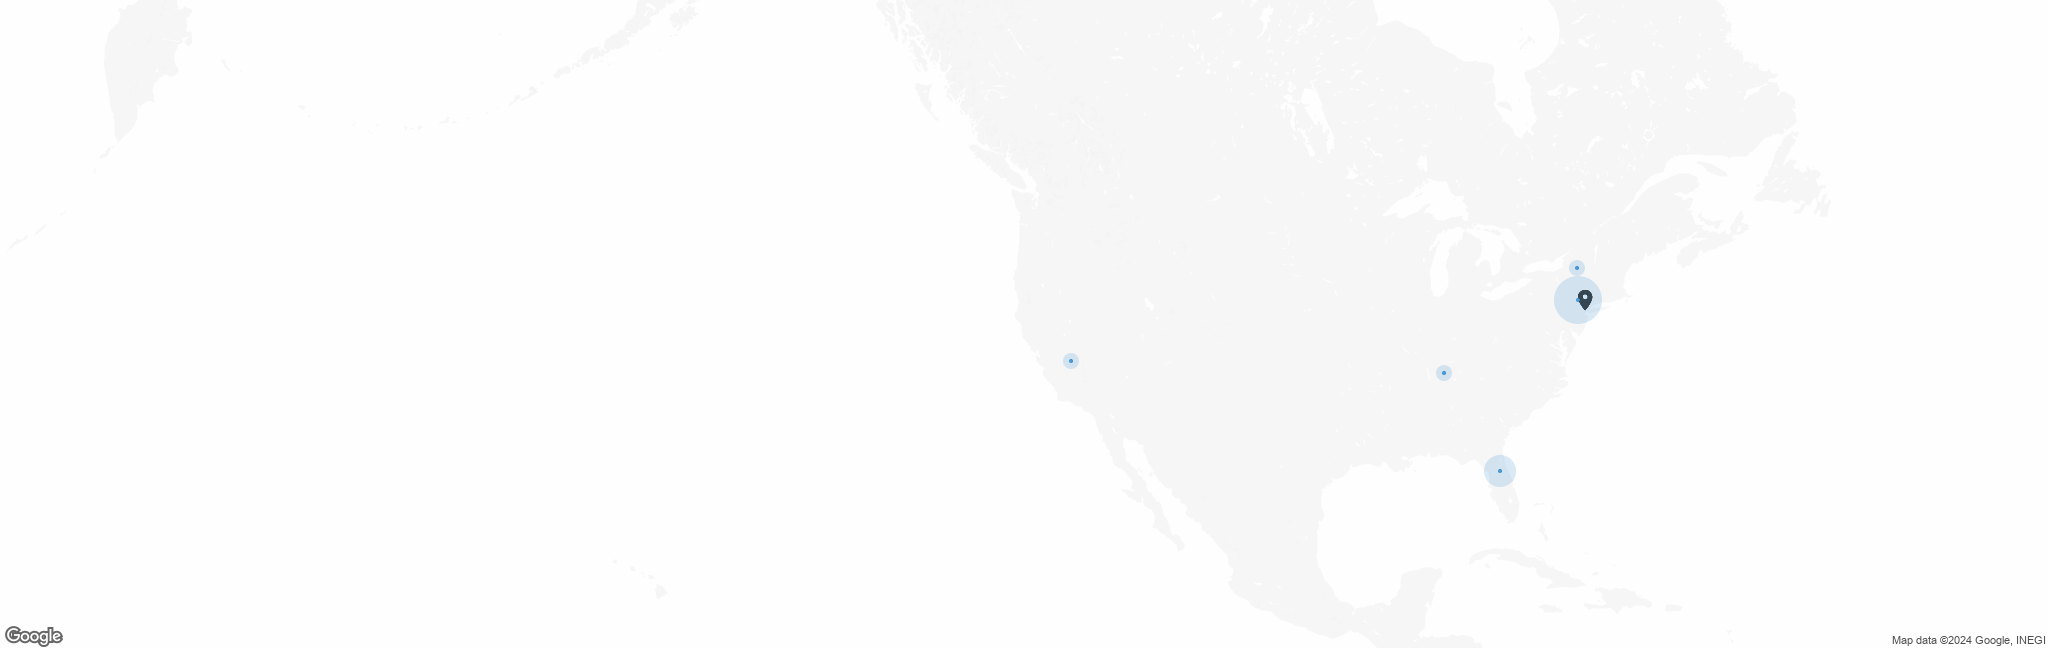 Map of US with pin of Shining Stars Network Inc (Shining Stars Network) location